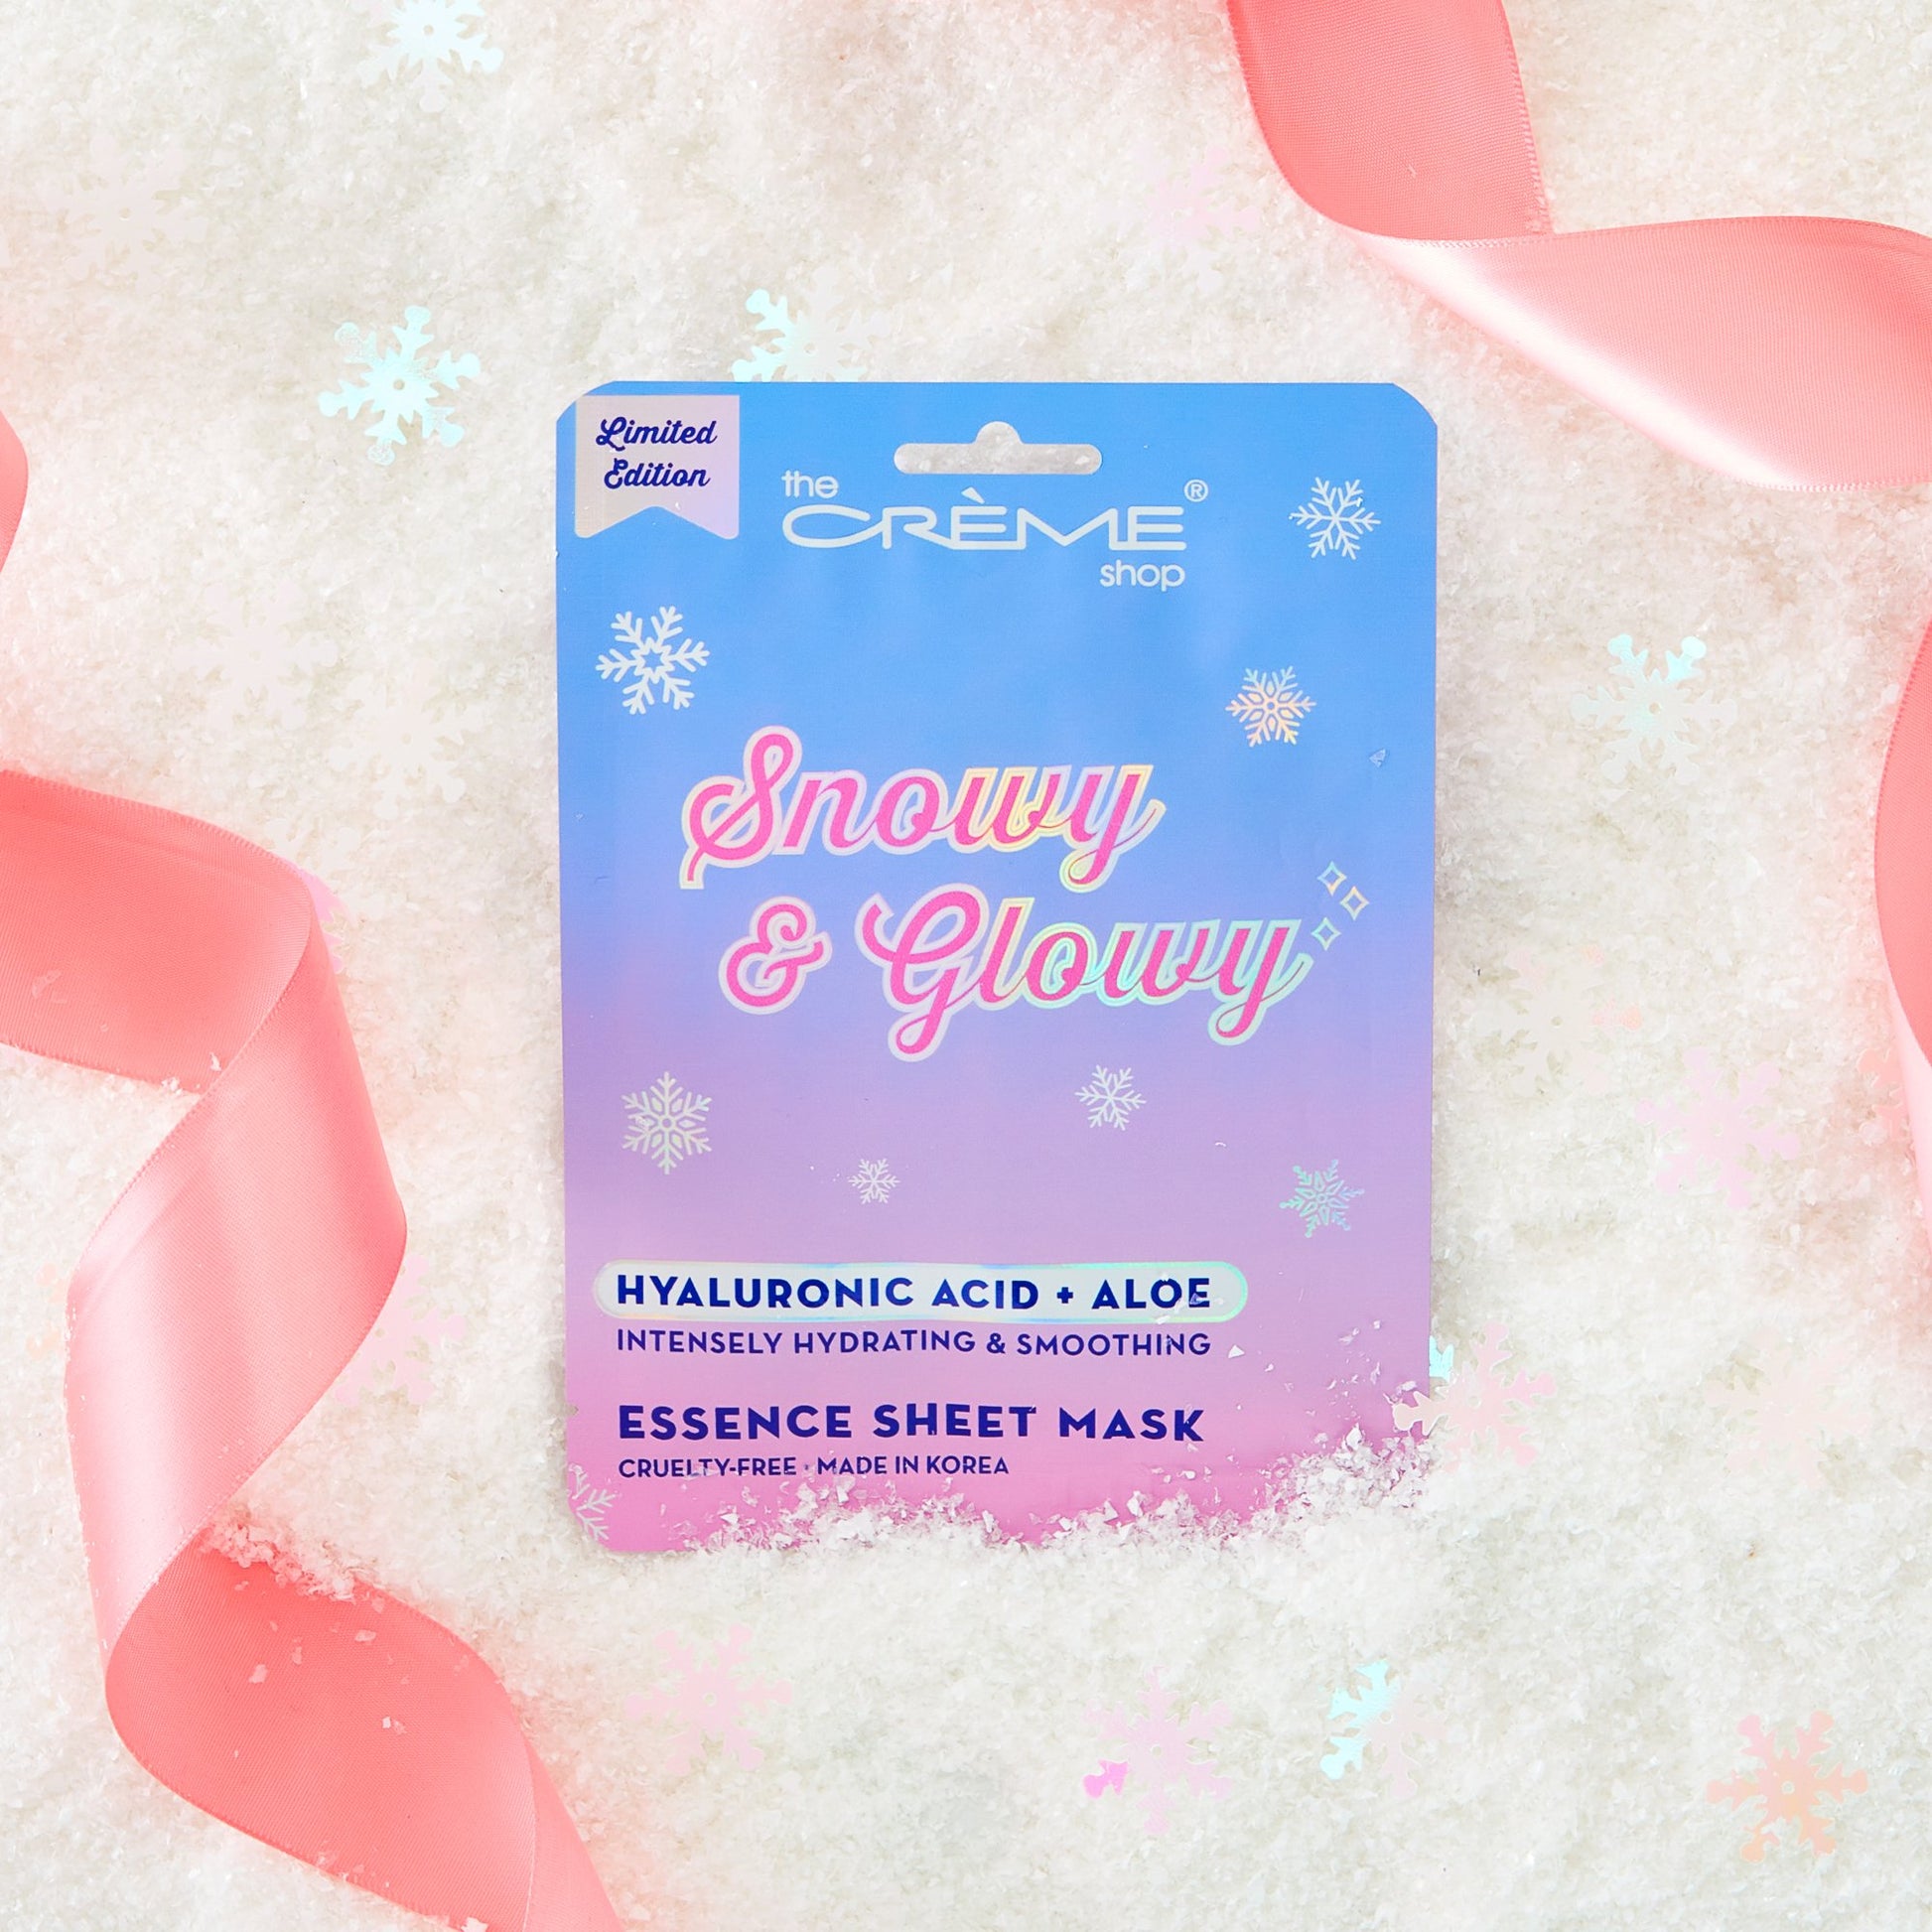 Snowy & Glowy Essence Sheet Mask | Intensely Hydrating (Set of 5) Holiday Sheet Masks - The Crème Shop 